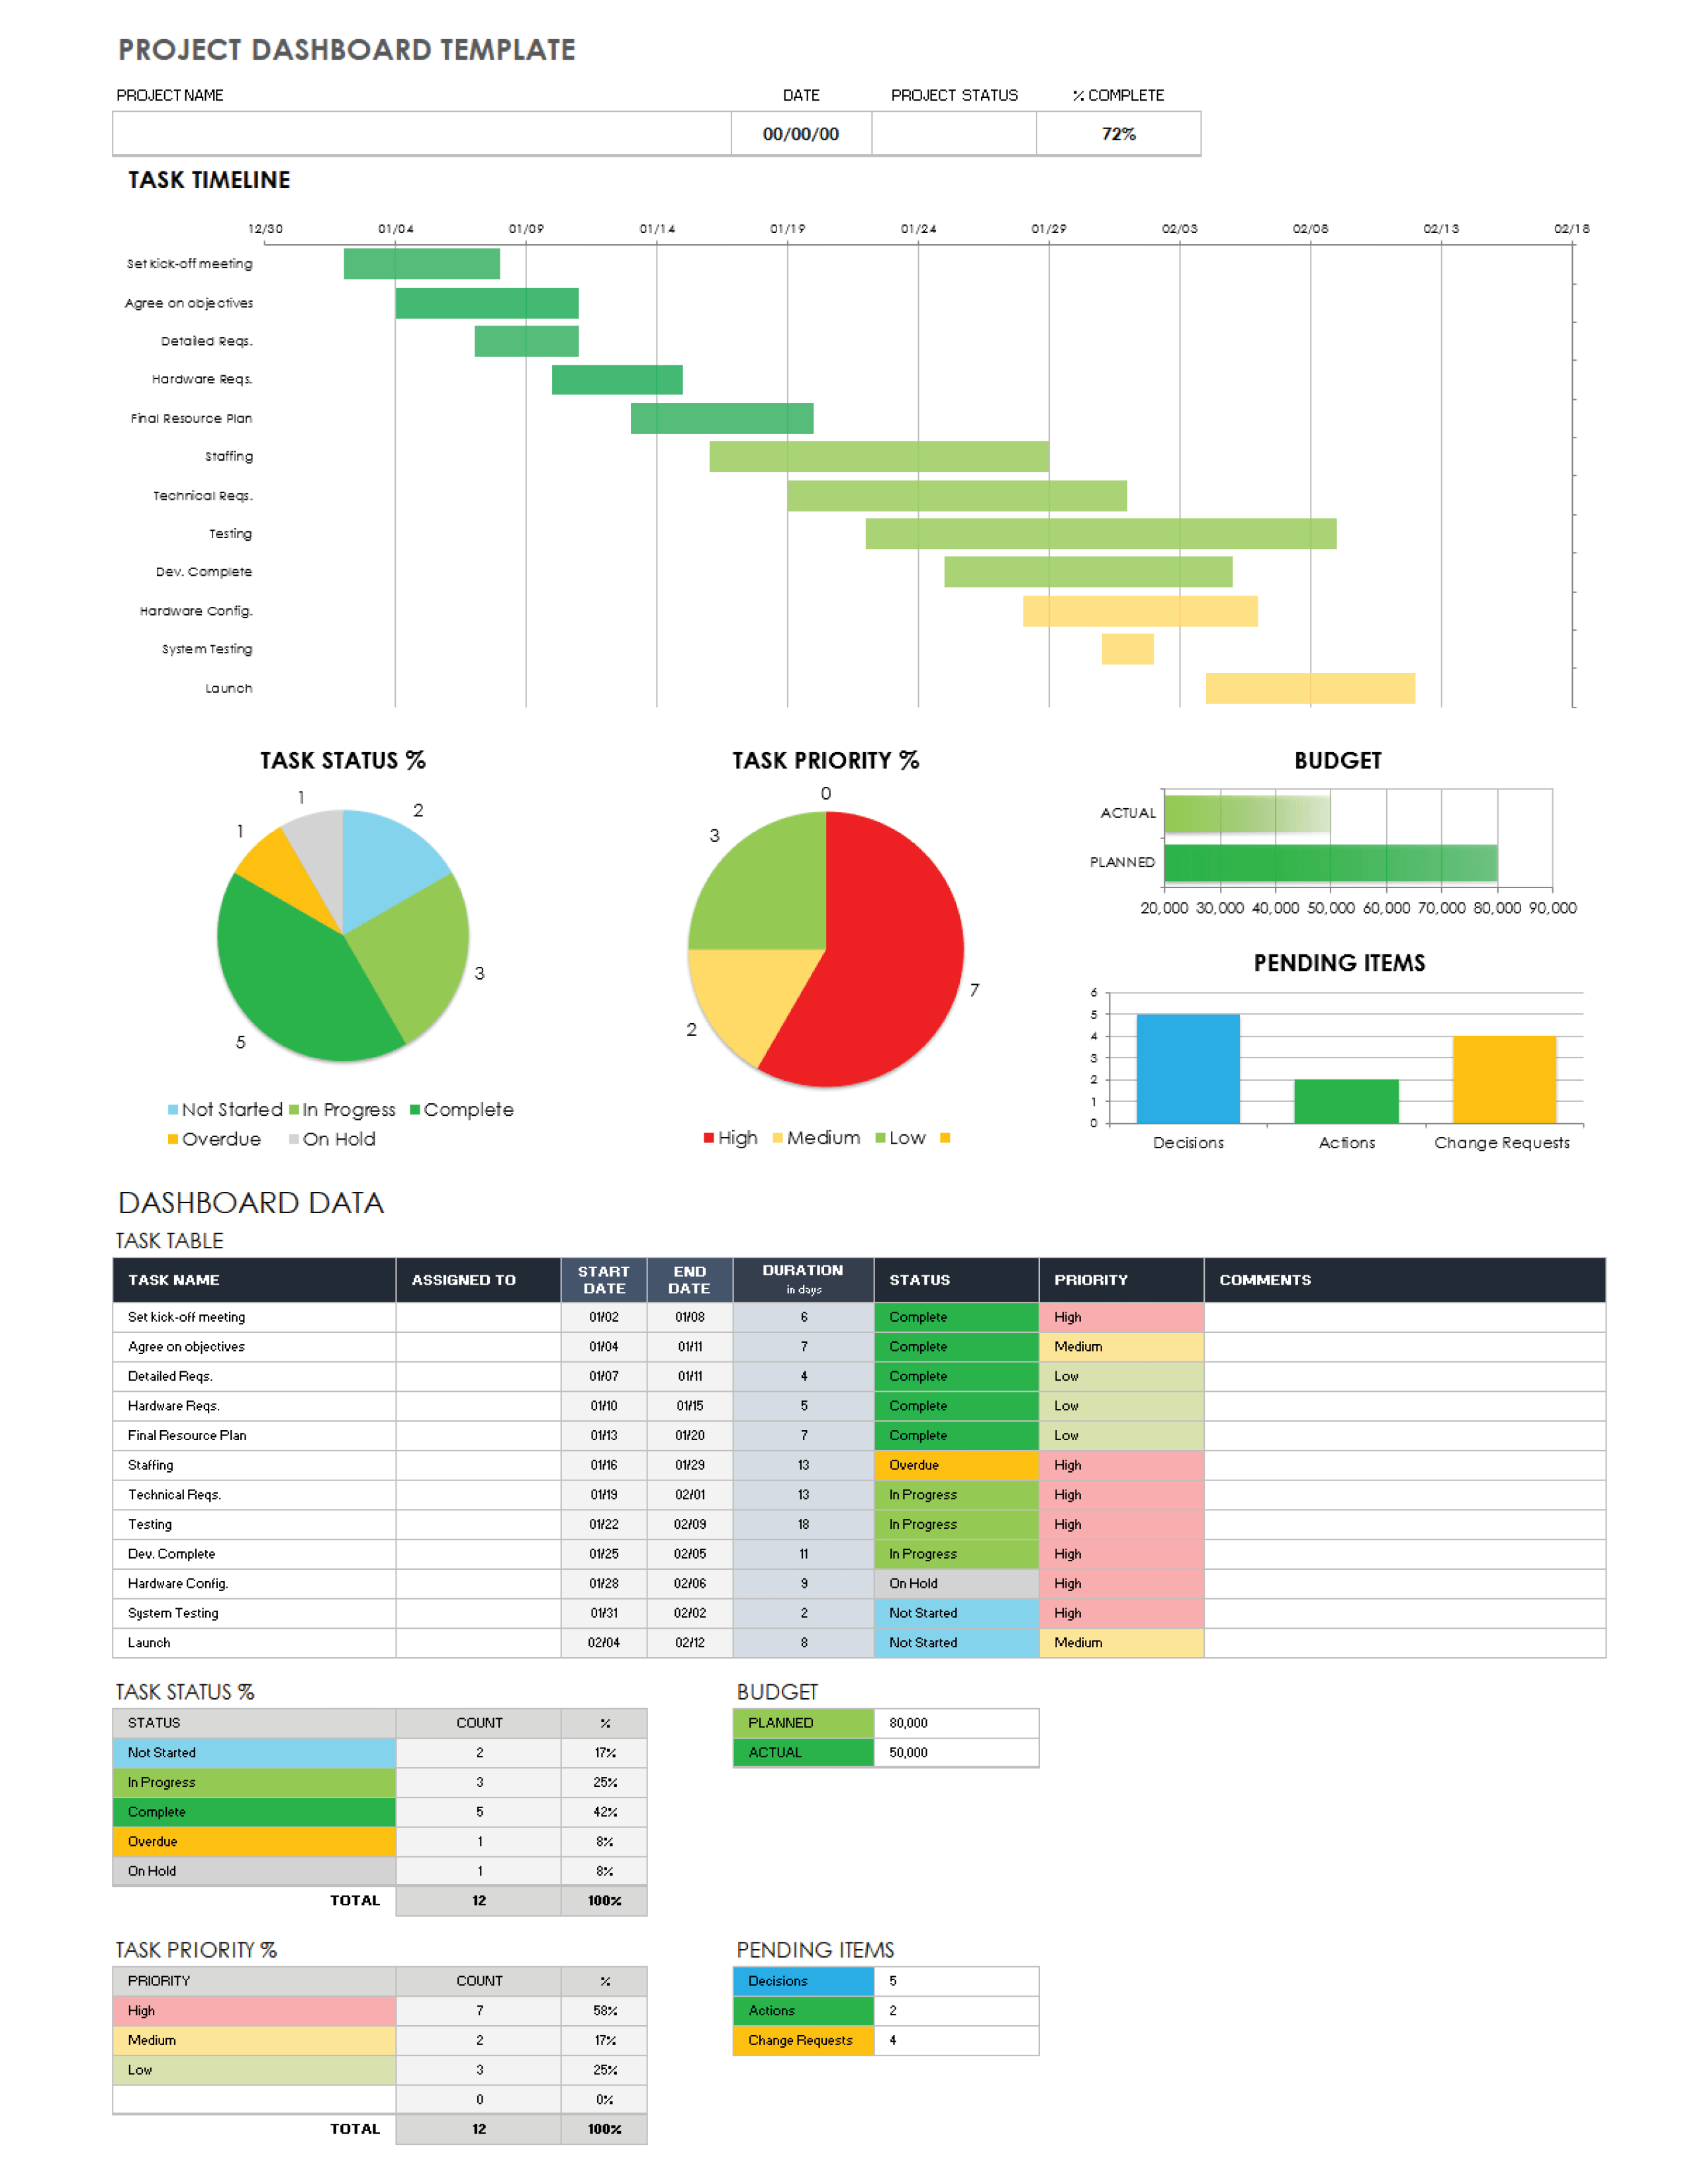 sample project dashboard report